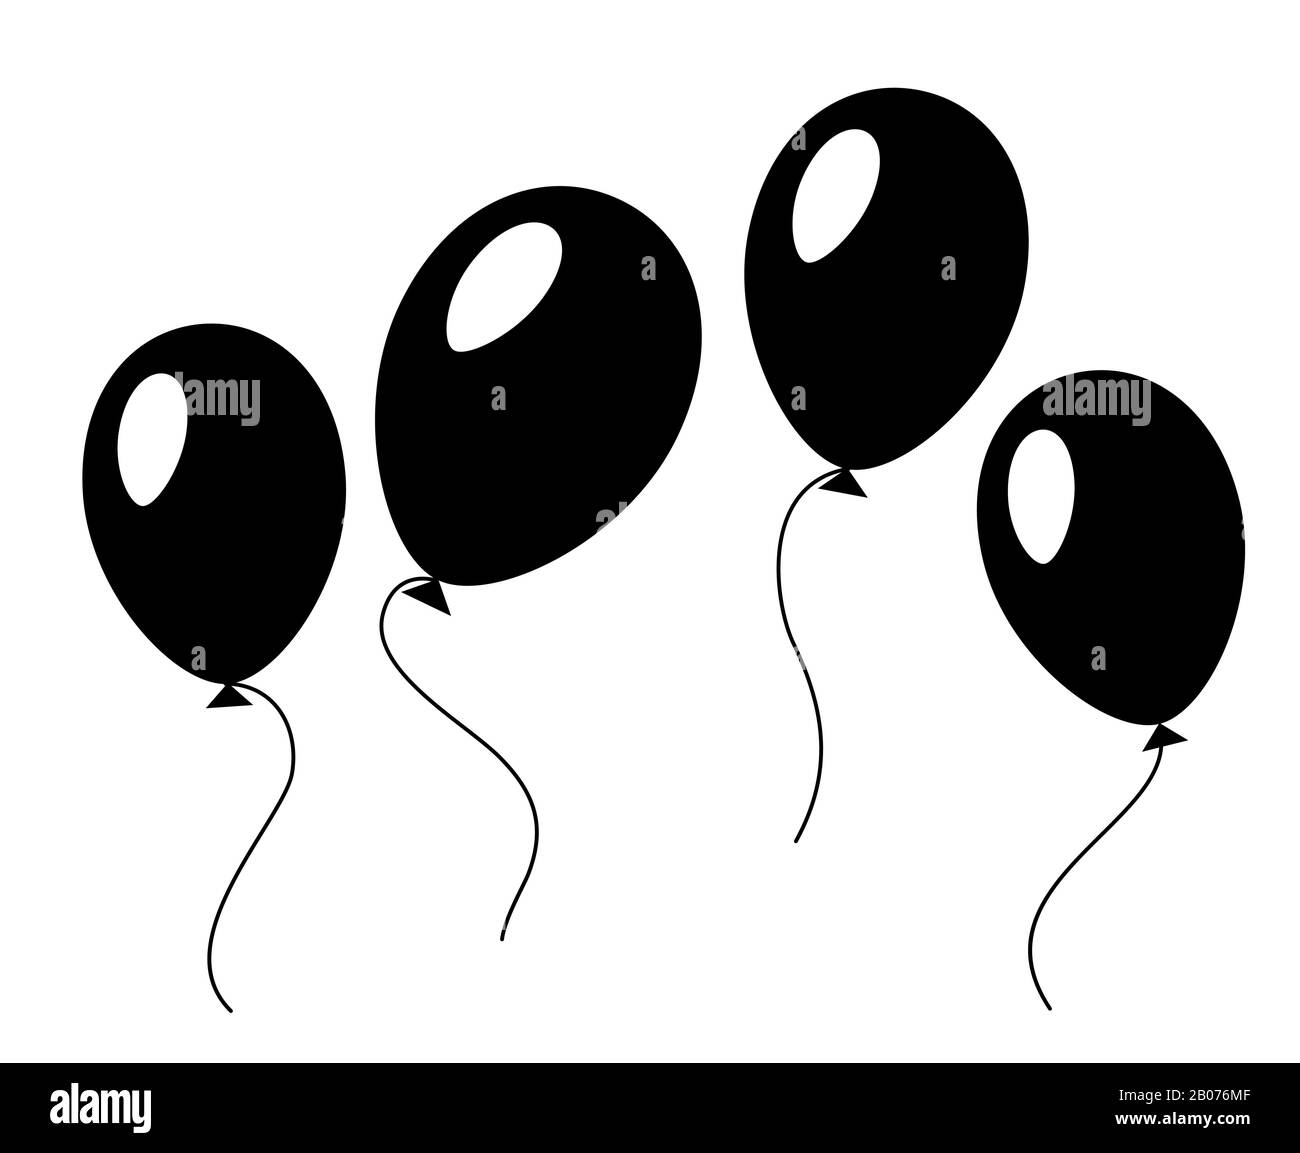 Baloons vector illustration in black and white for birthday party Stock Vector